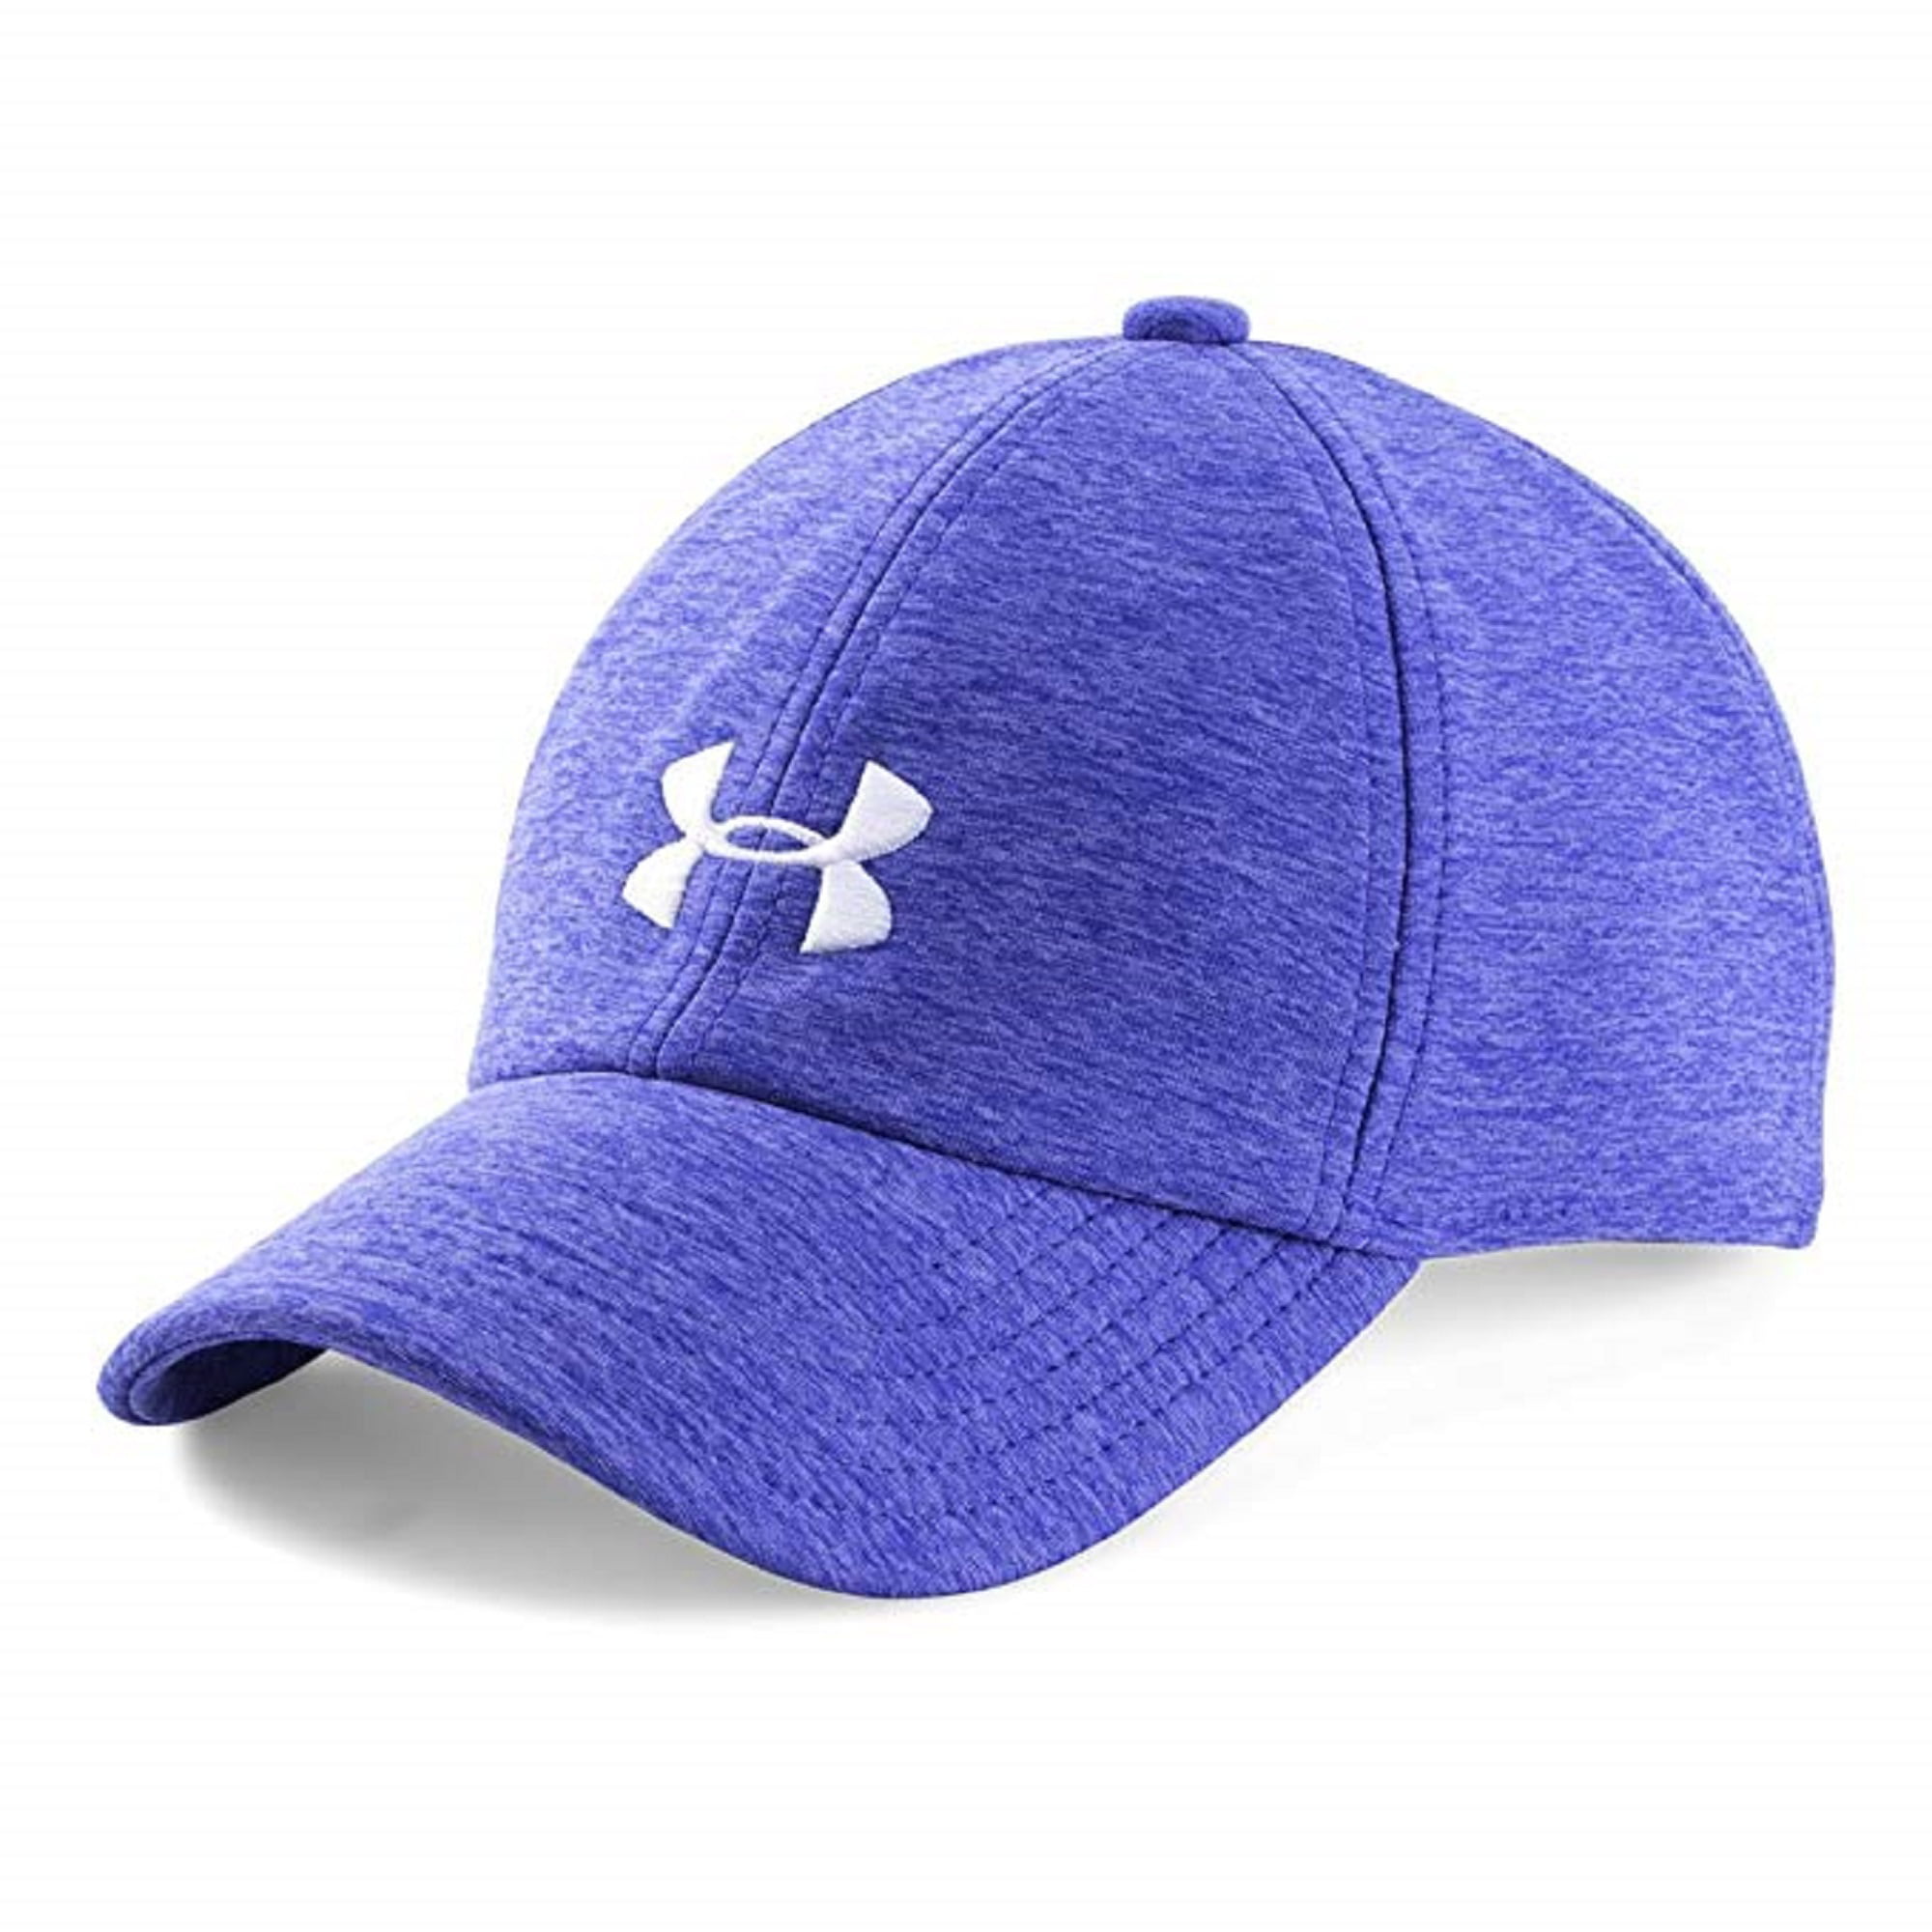 Under Armour Girls' Twisted Cap 